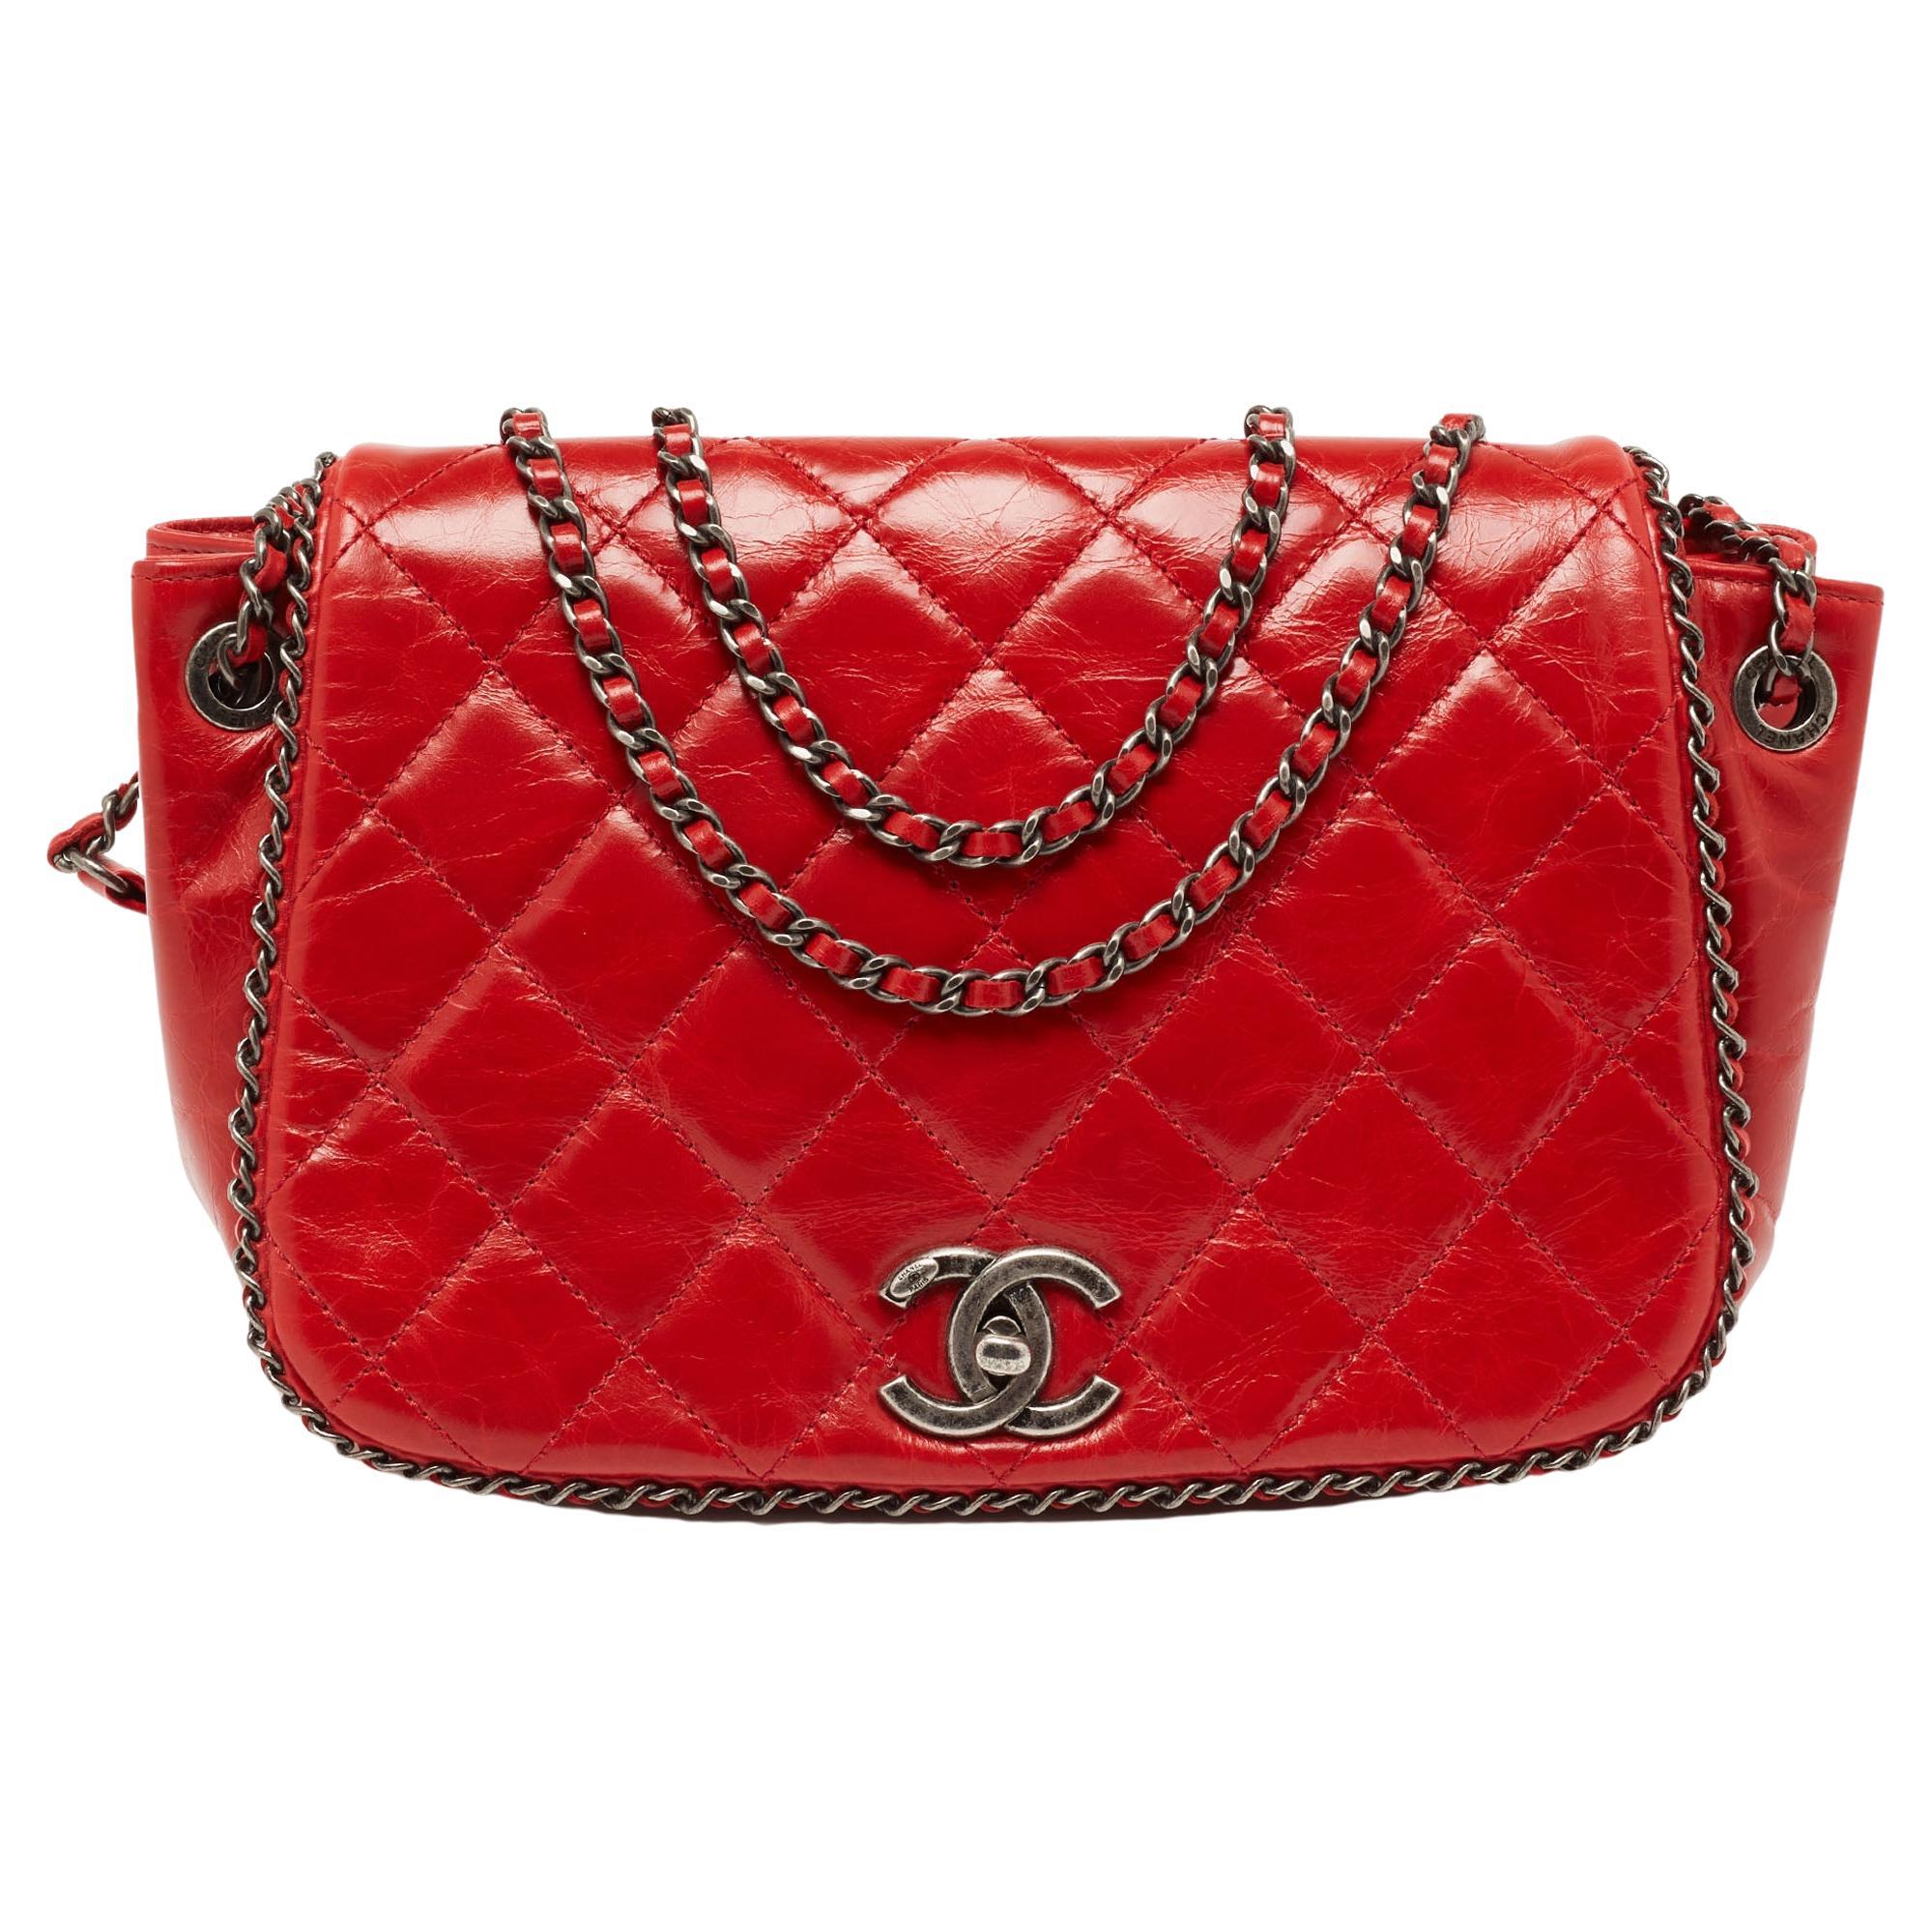 CHANEL Cruise Line Chain Tote Bag Canvas Red Navy CC Auth 53279